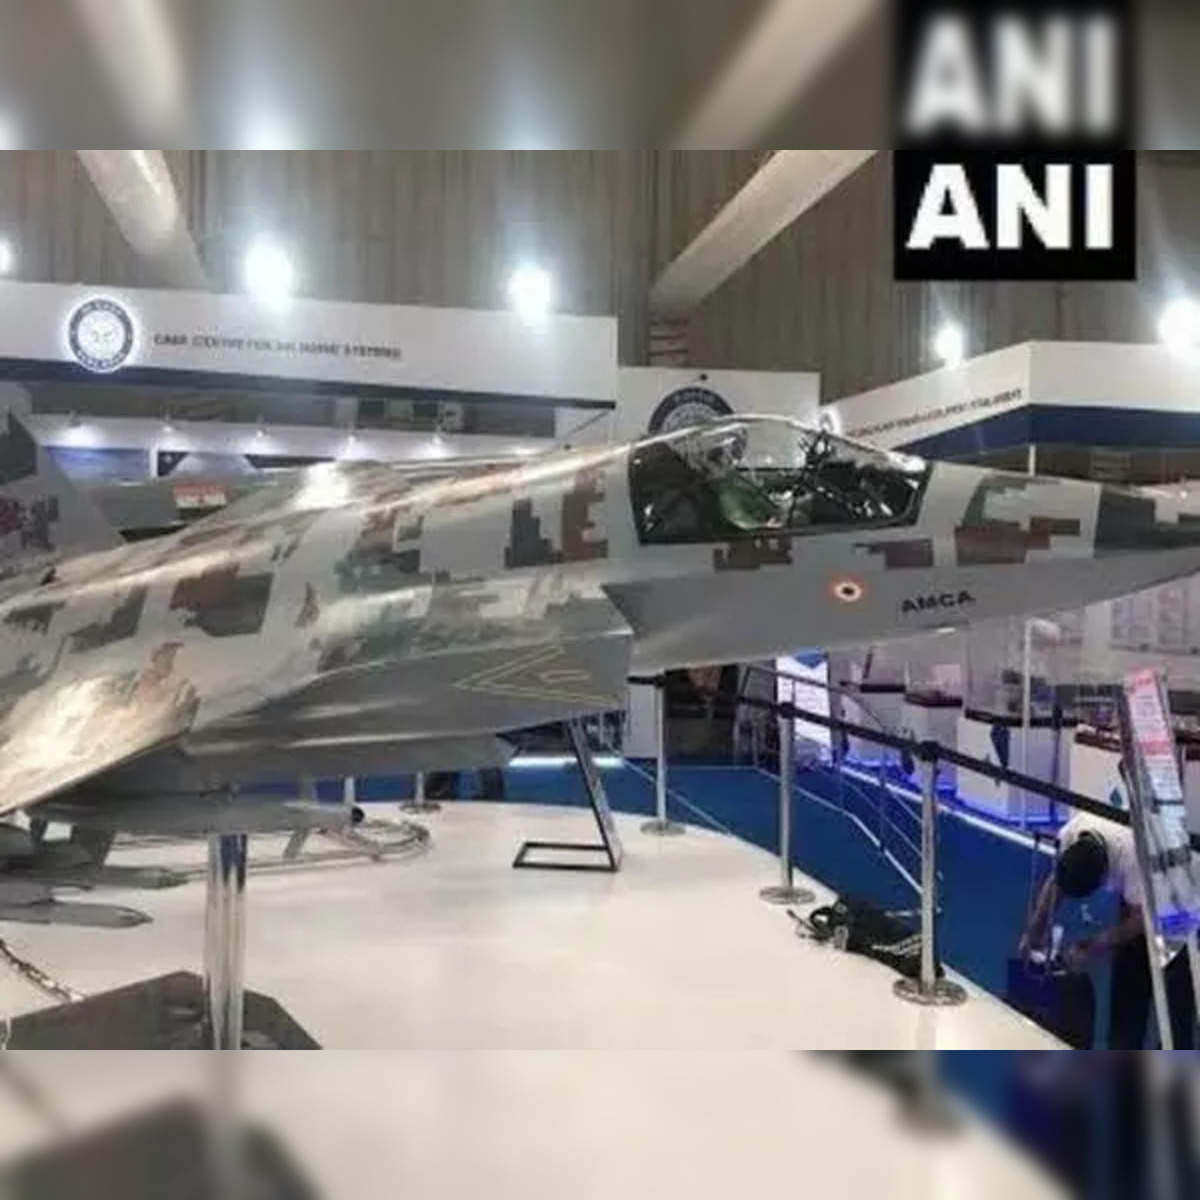 stealth fighter aircraft: India clears project to develop AMCA 5th  generation stealth fighter aircraft - The Economic Times